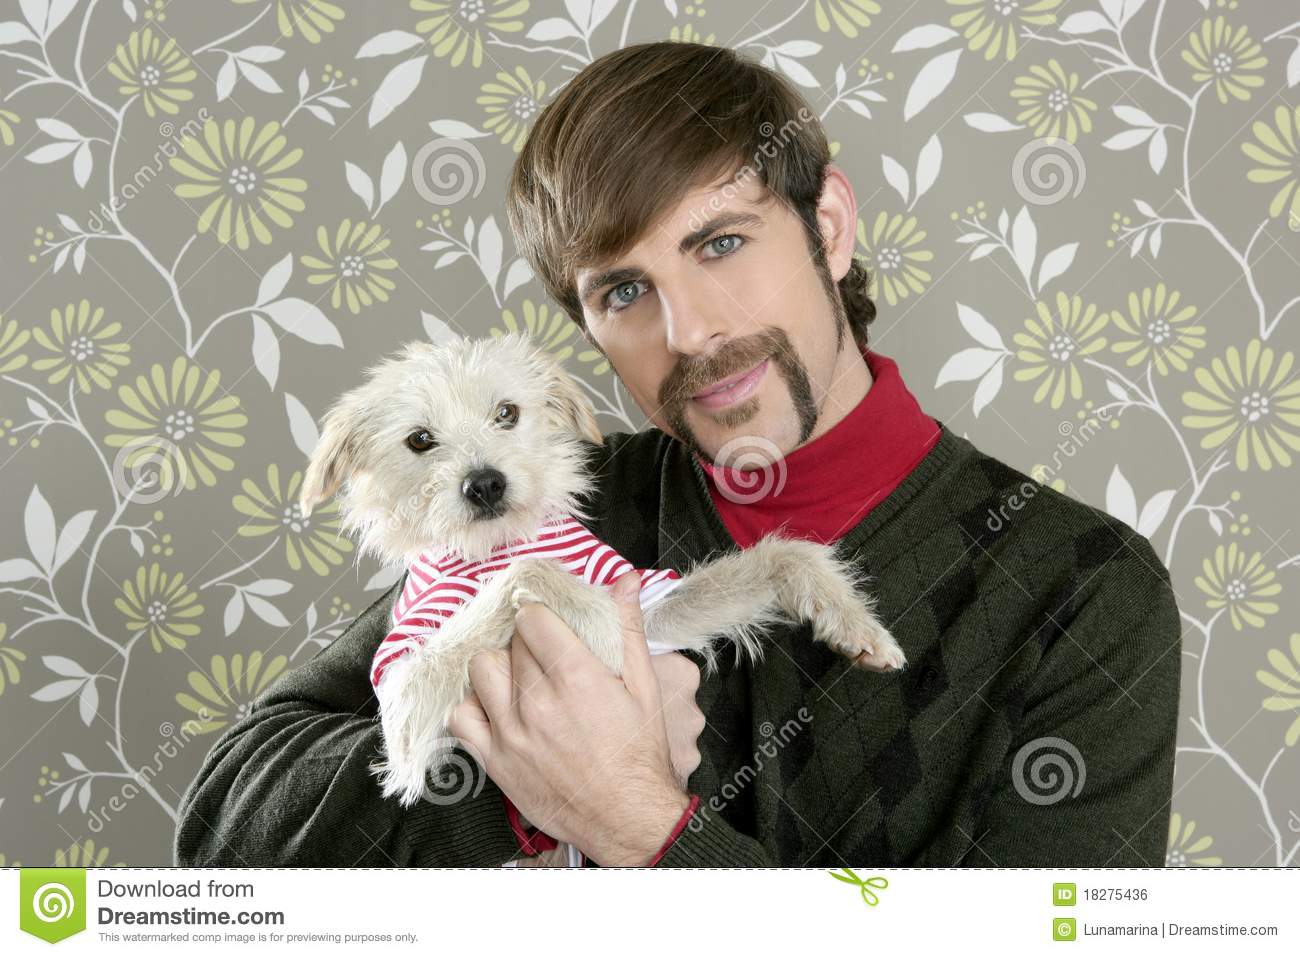 Geek Retro Man Holding Dog Silly On Wallpaper Royalty